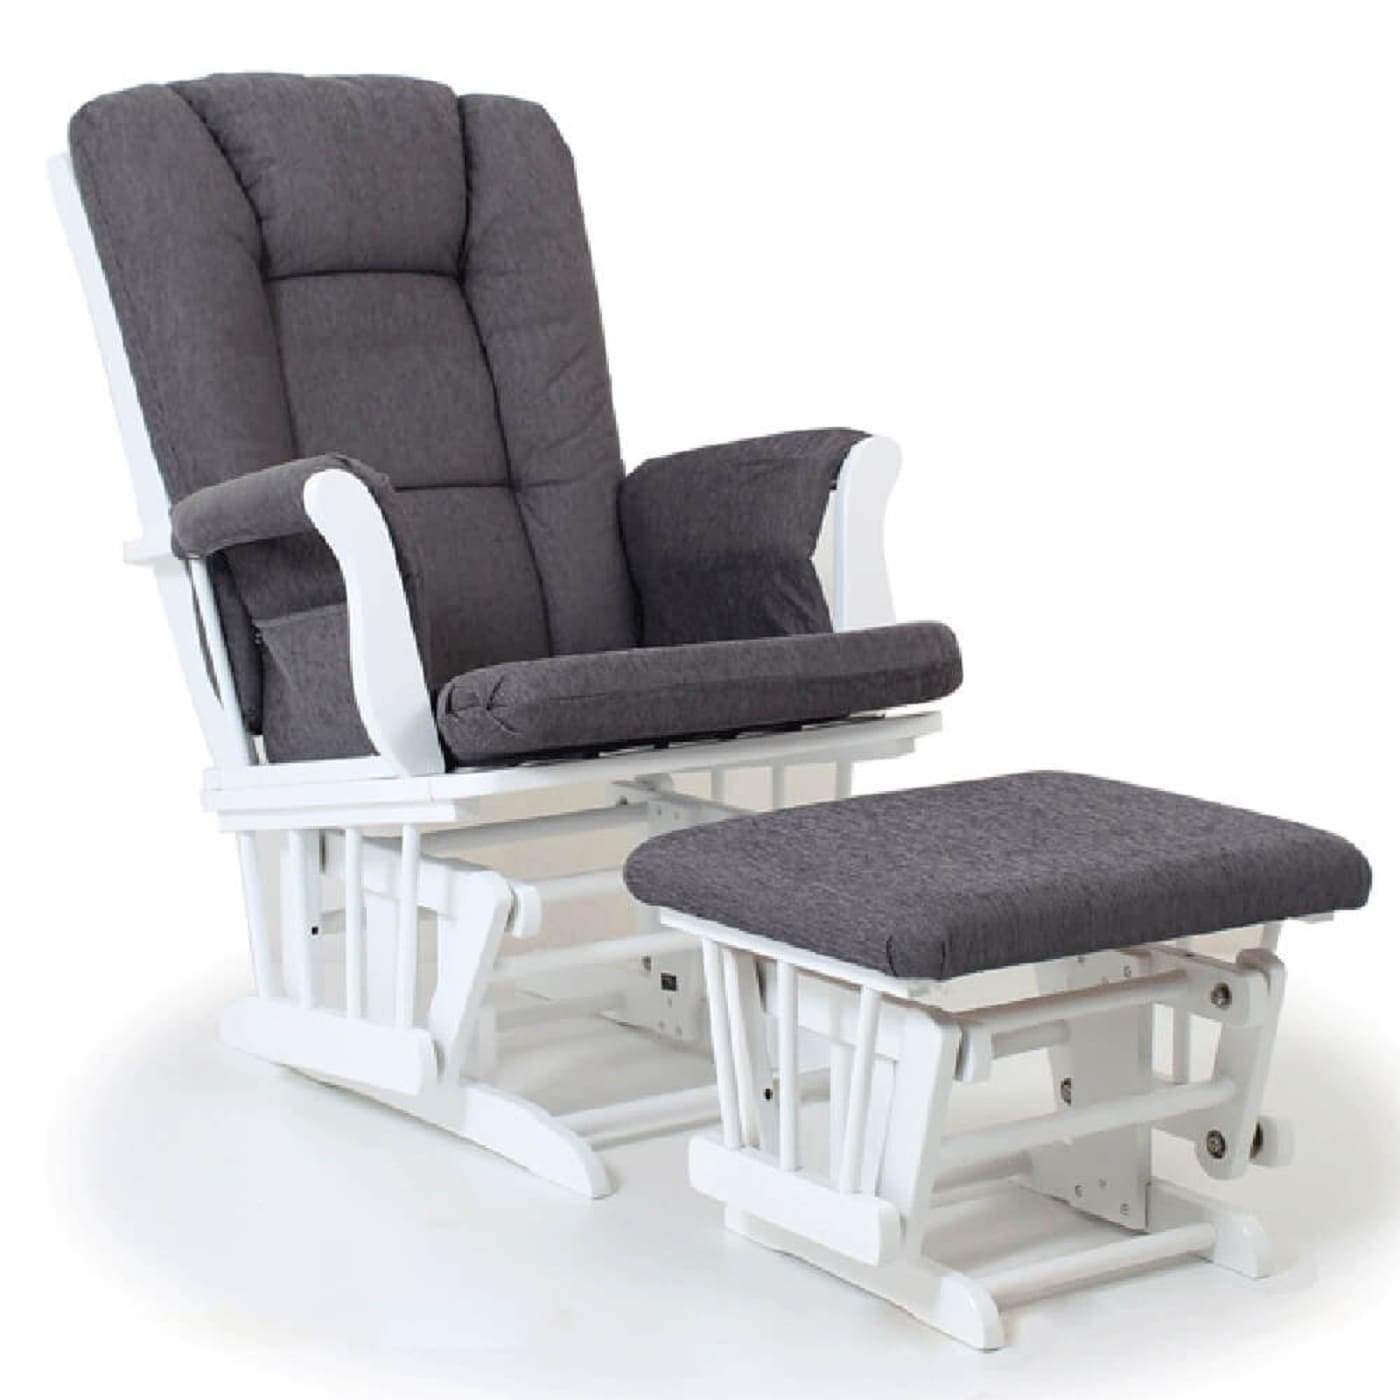 Valco Baby Bliss Glider - Antique Grey - Antique Grey - NURSERY & BEDTIME - GLIDERS/ROCKING CHAIRS